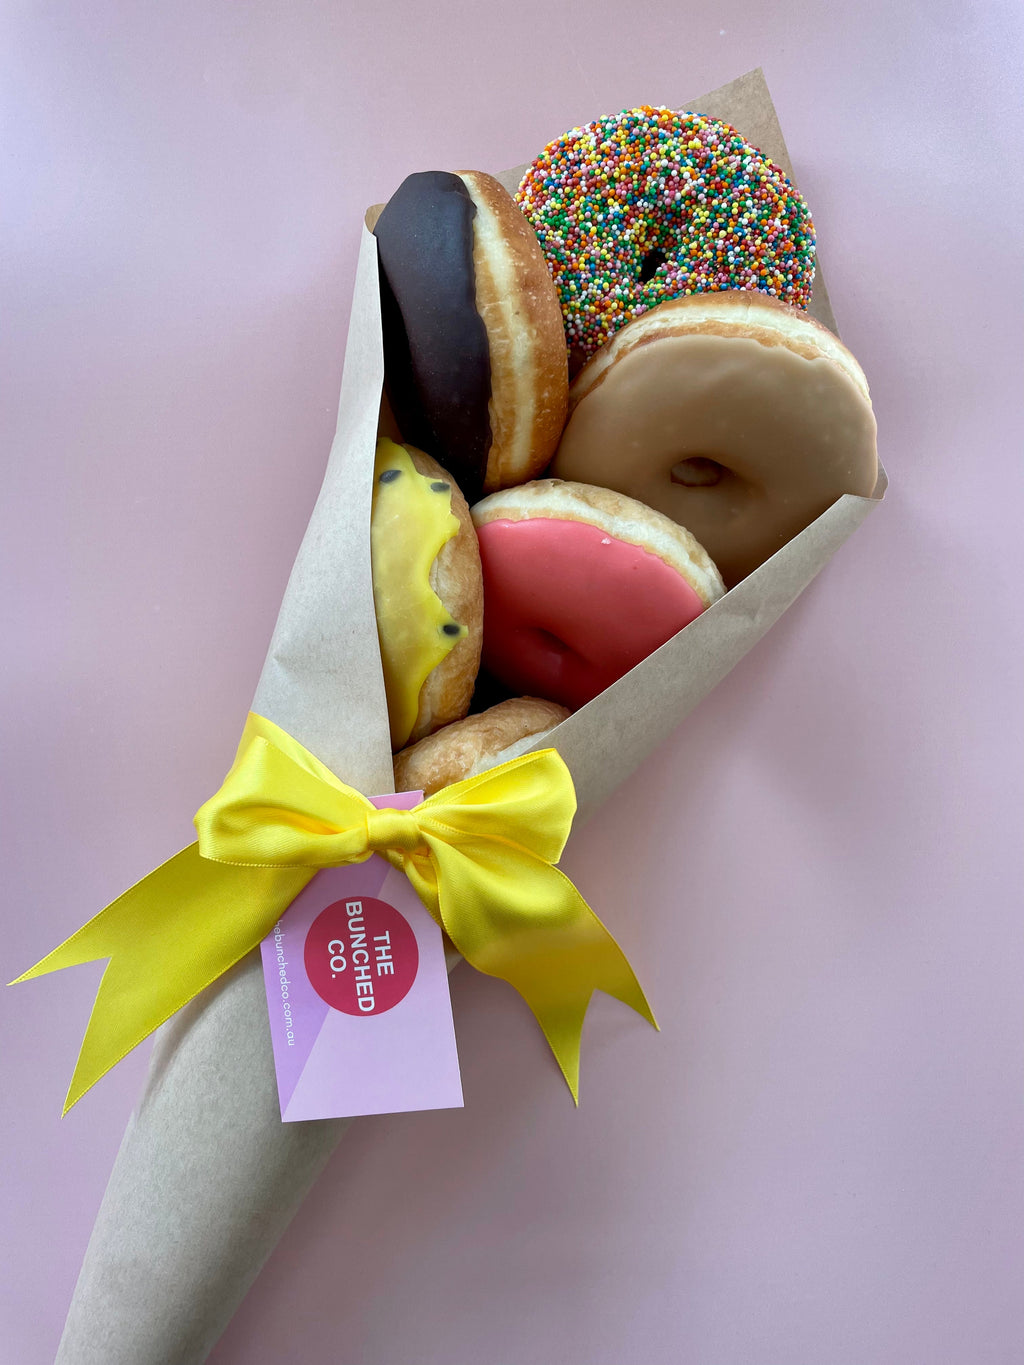 The Squat For Your Donut Bouquet - Social Media Promotion